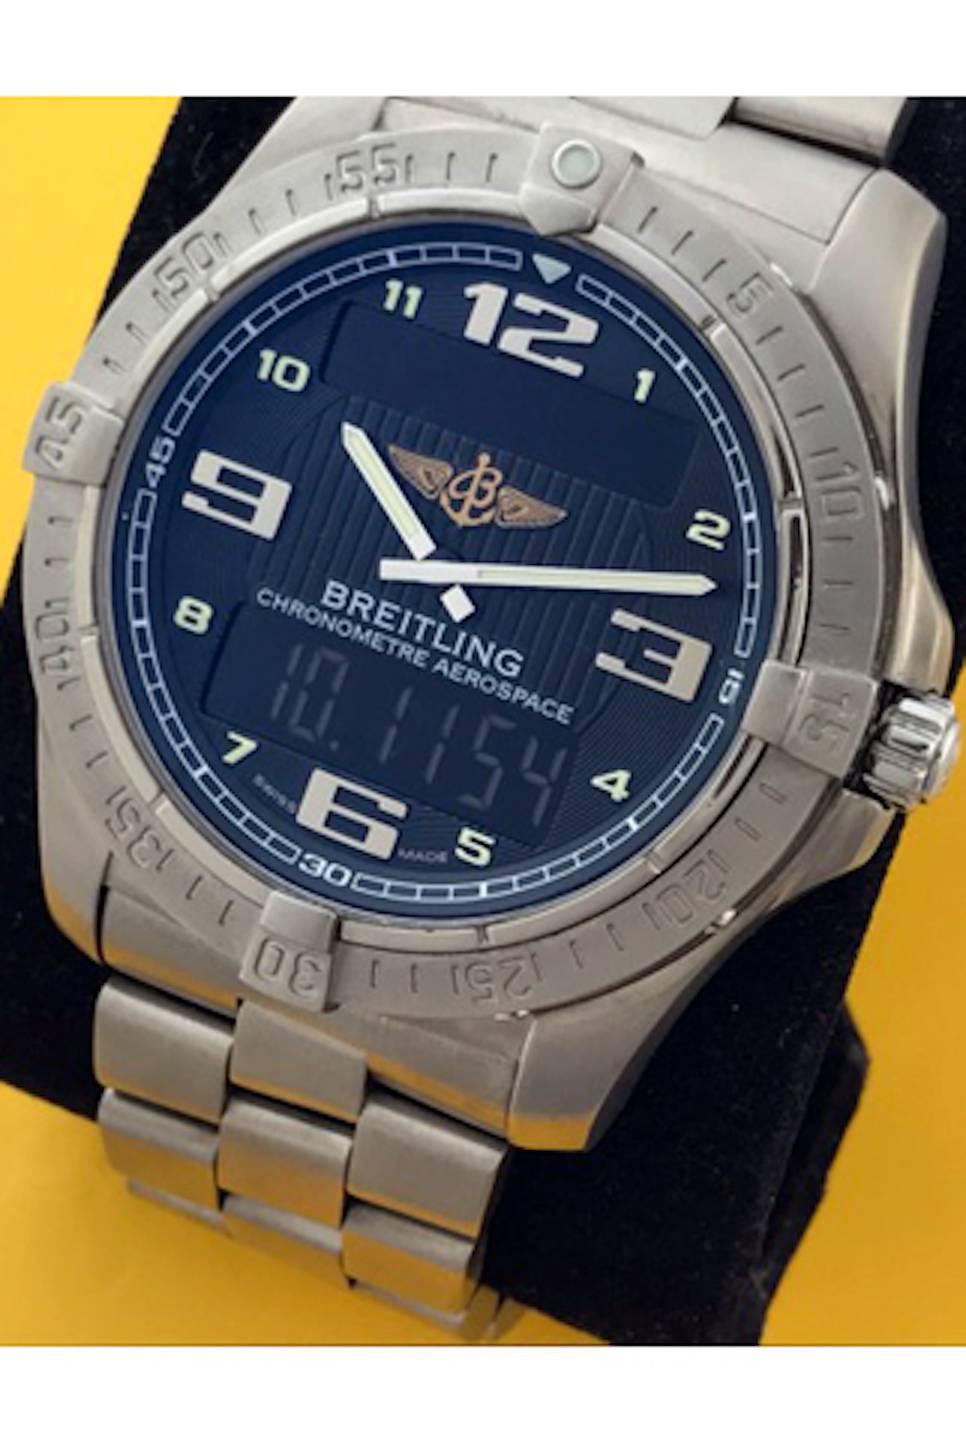 Breitling Aerospace Avantage Titanium Quartz Men's Wrist Watch. Model E7936210/B962-TI. Certified pre-owned and ready to ship! Chronograph- GMT 2nd Time Zone & Alarm Feature - Perpetual Day & Date Calendar - Electronic & Analog LCD Digital Display.